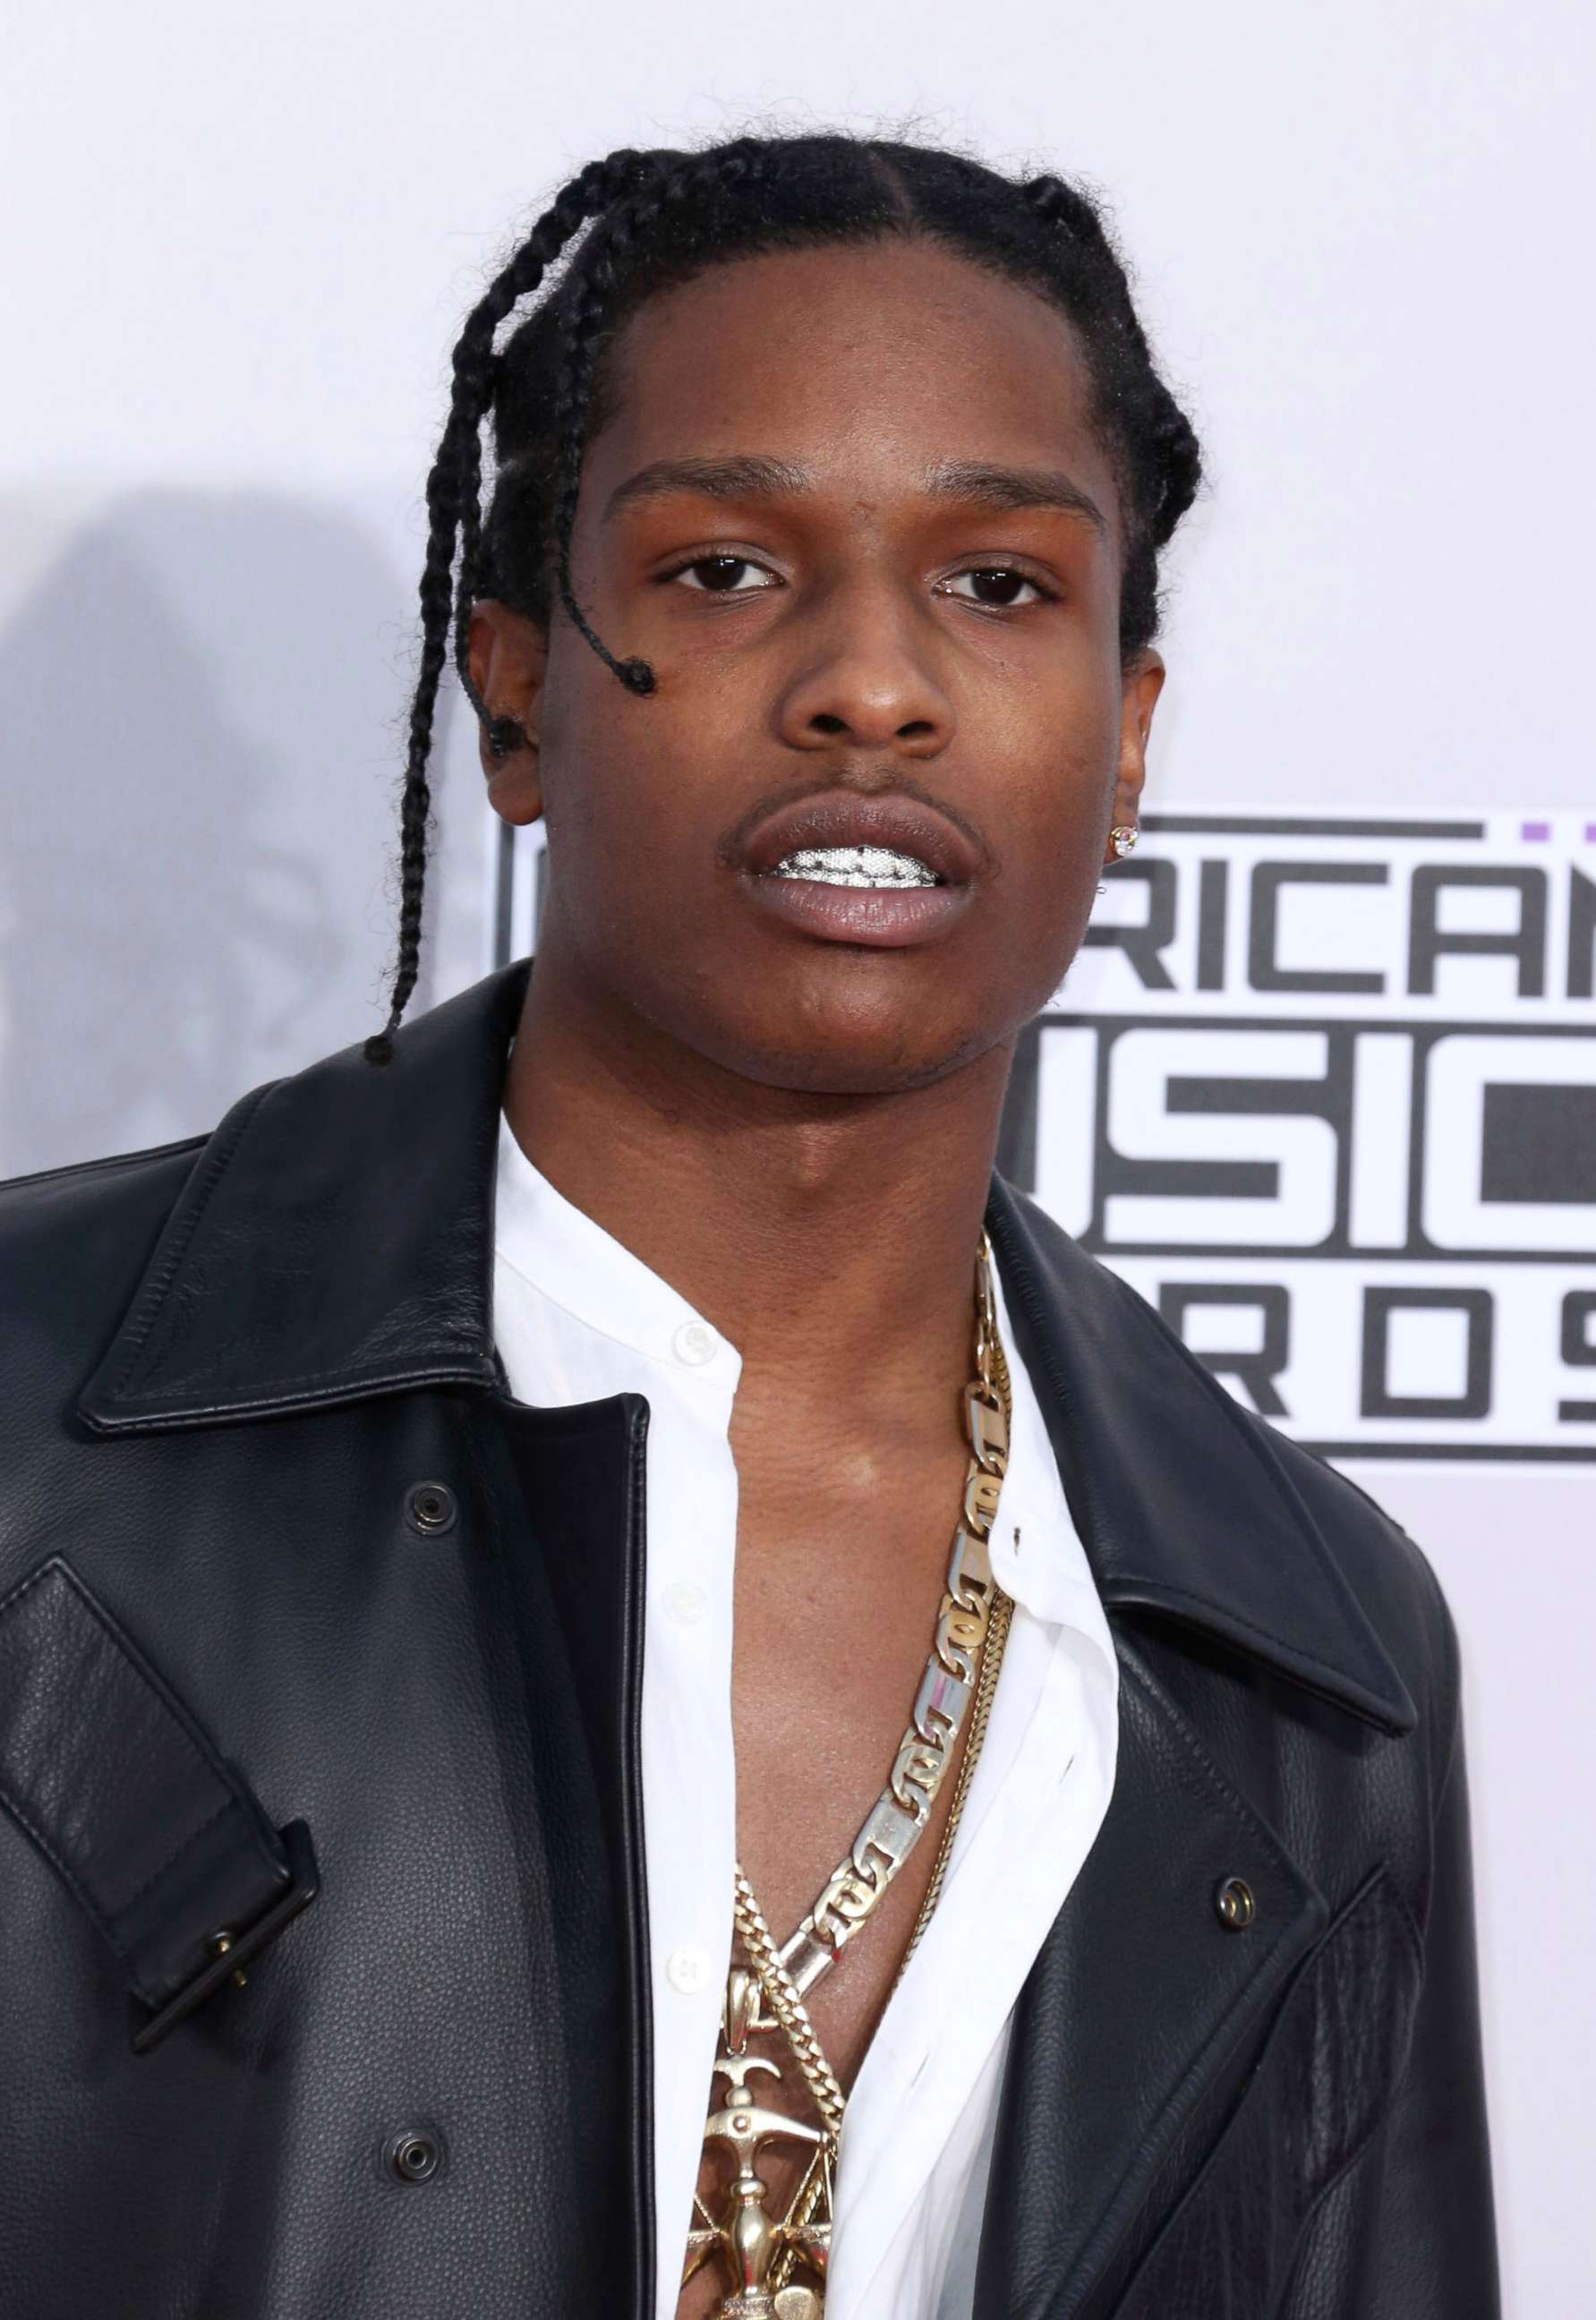 PHOTO: Rapper A$AP Rocky attends the 2014 American Music Awards held on Nov. 23, 2014 in Los Angeles. Rapper A$AP Rocky is charged with felony assault with a firearm in connection with a Nove. 2021 shooting in Hollywood, Calif.